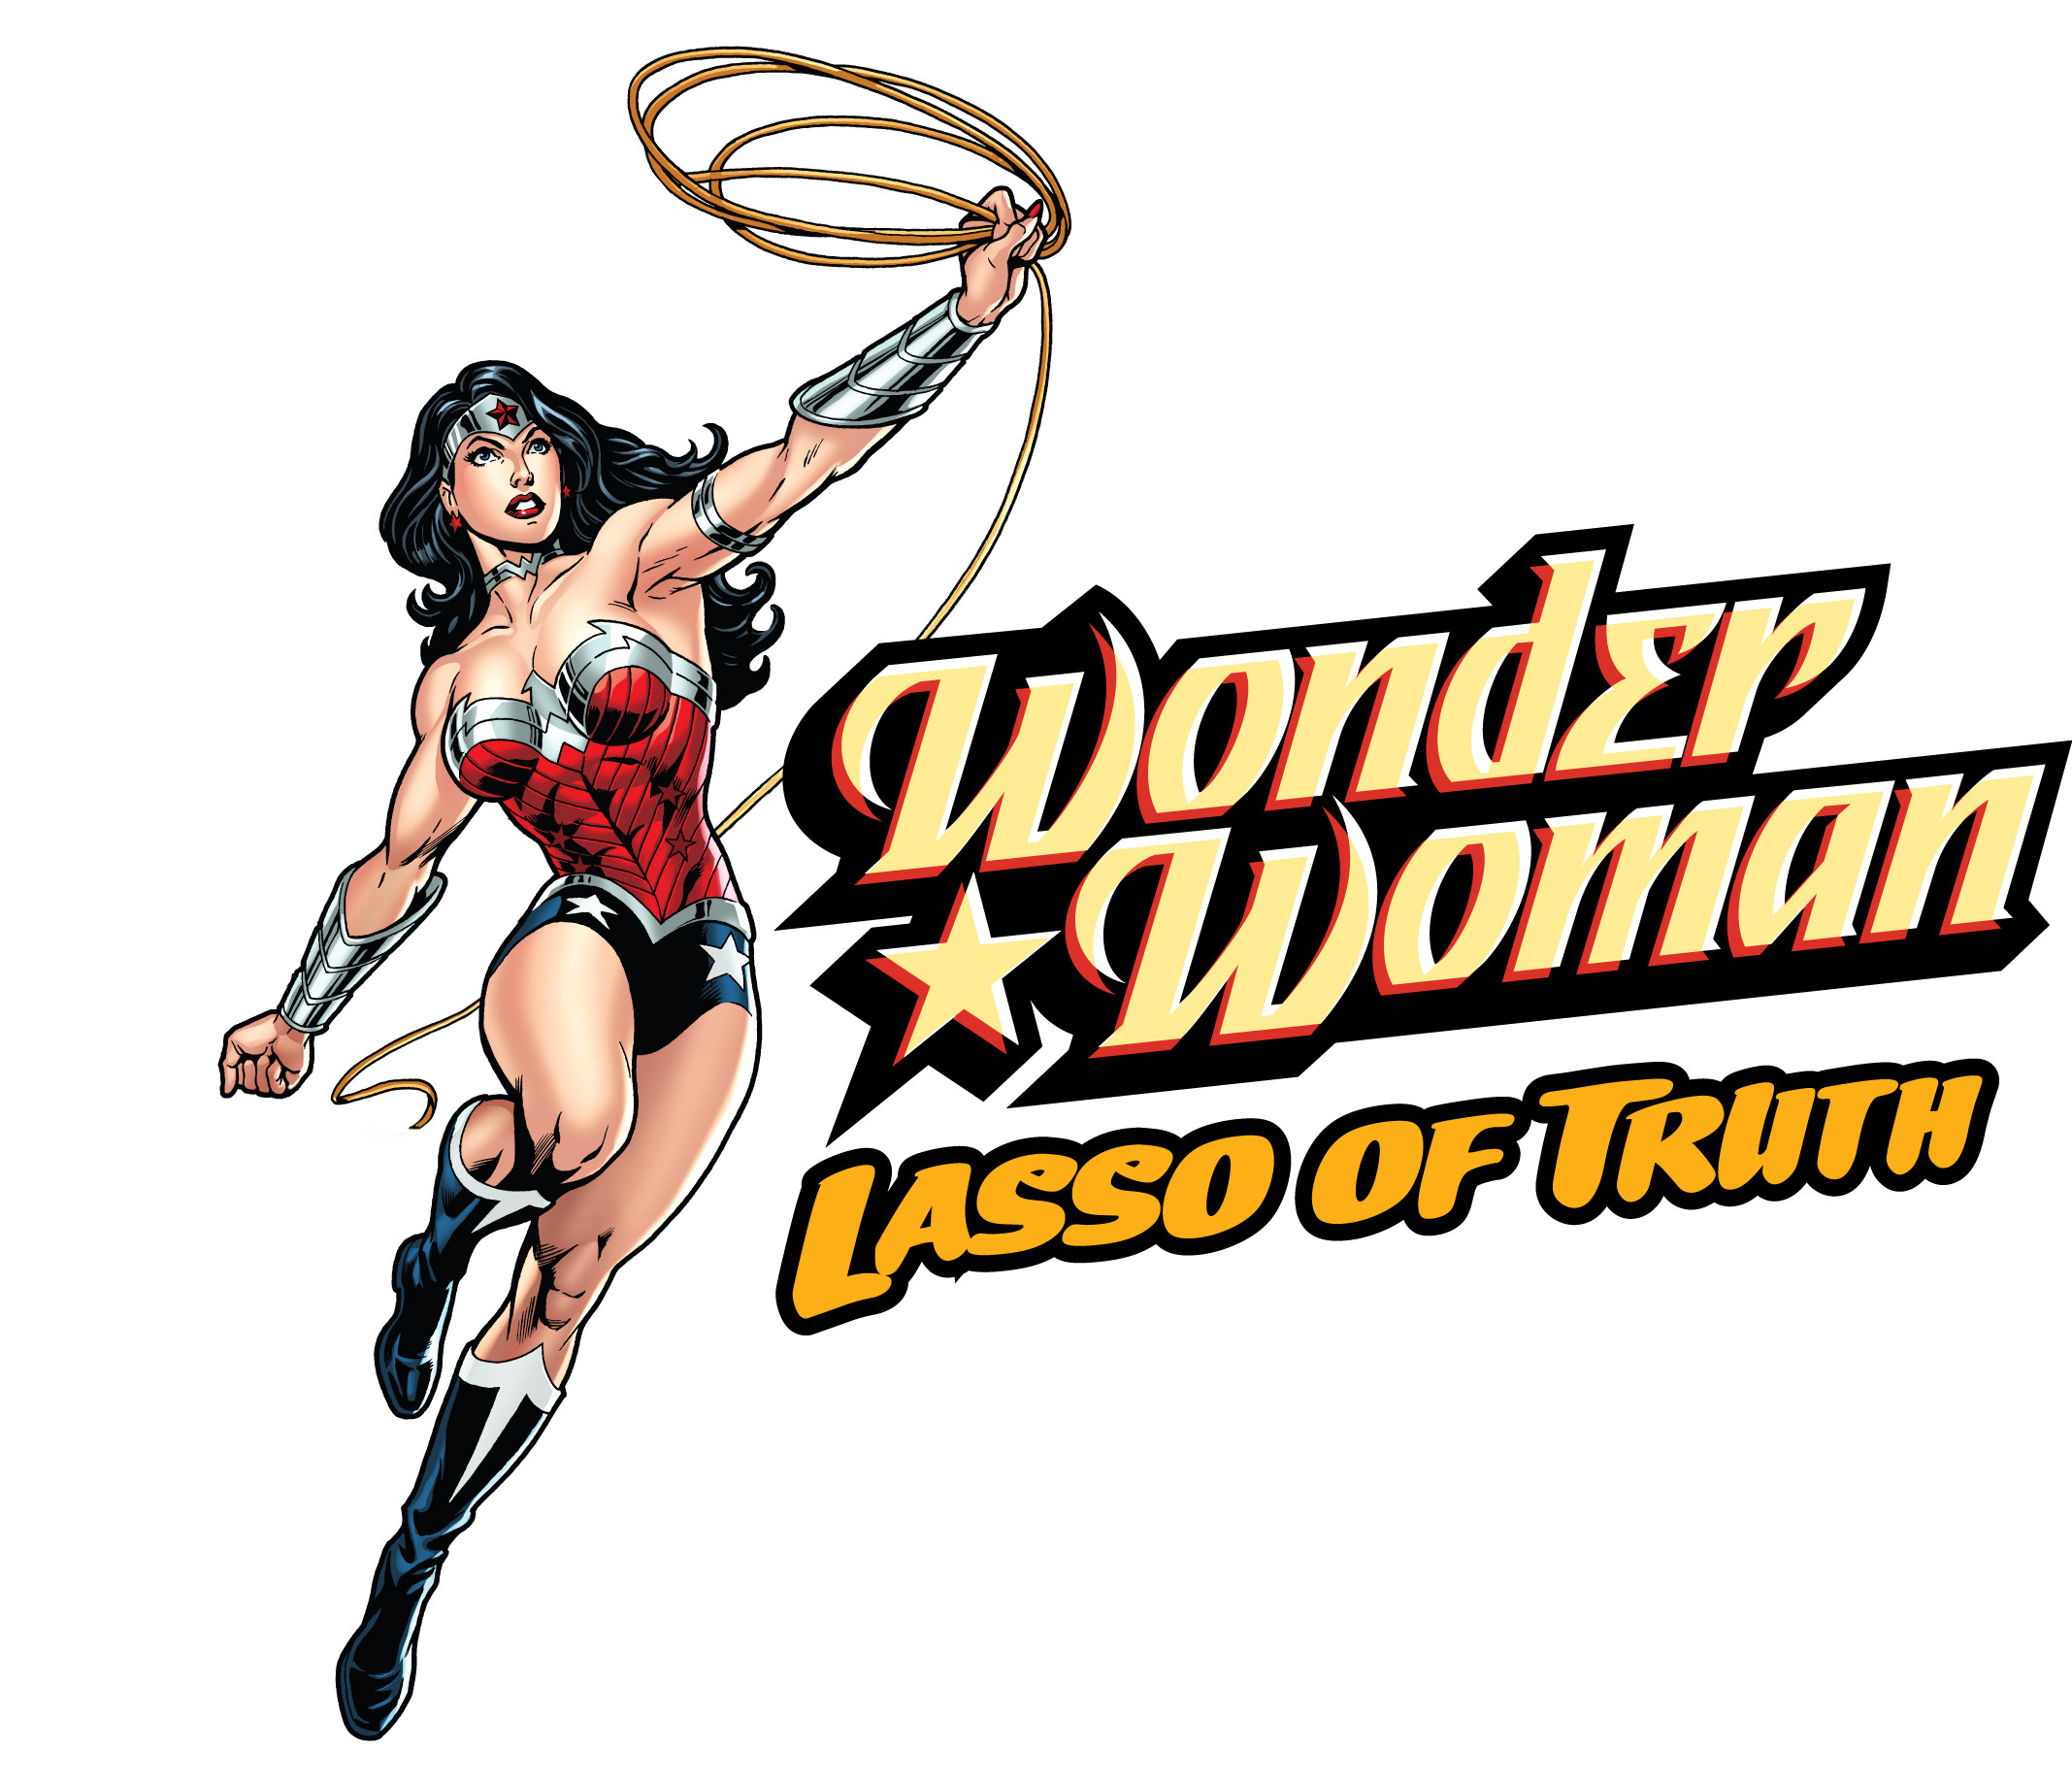 Wild New Wonder Woman Lasso Of Truth Ride Attraction Set To Open At Six Flags Discovery Kingdom In 17 Business Wire